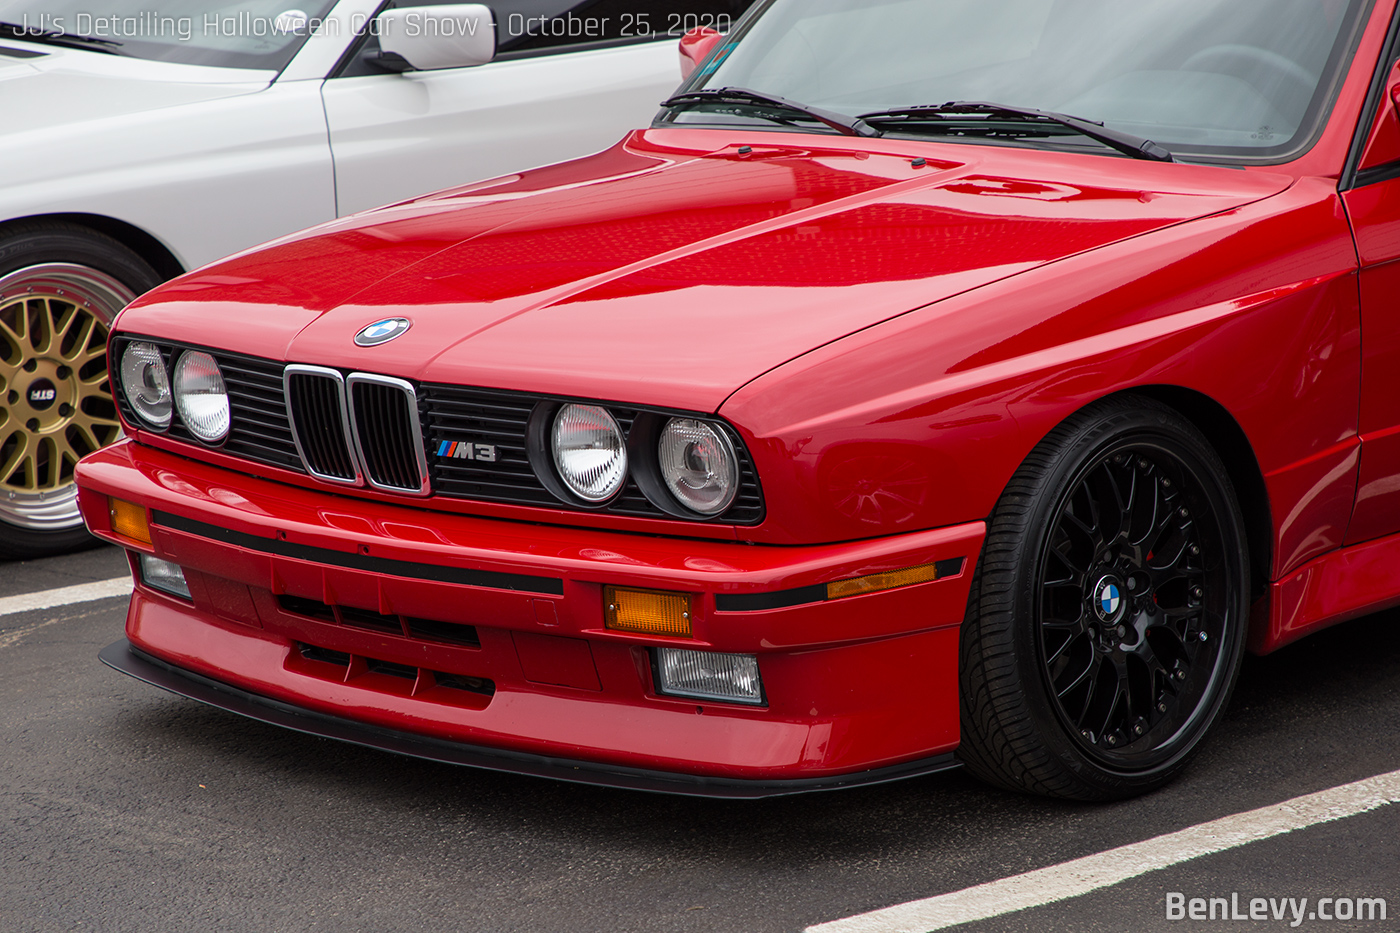 Front bumper of Red E30 BMW M3